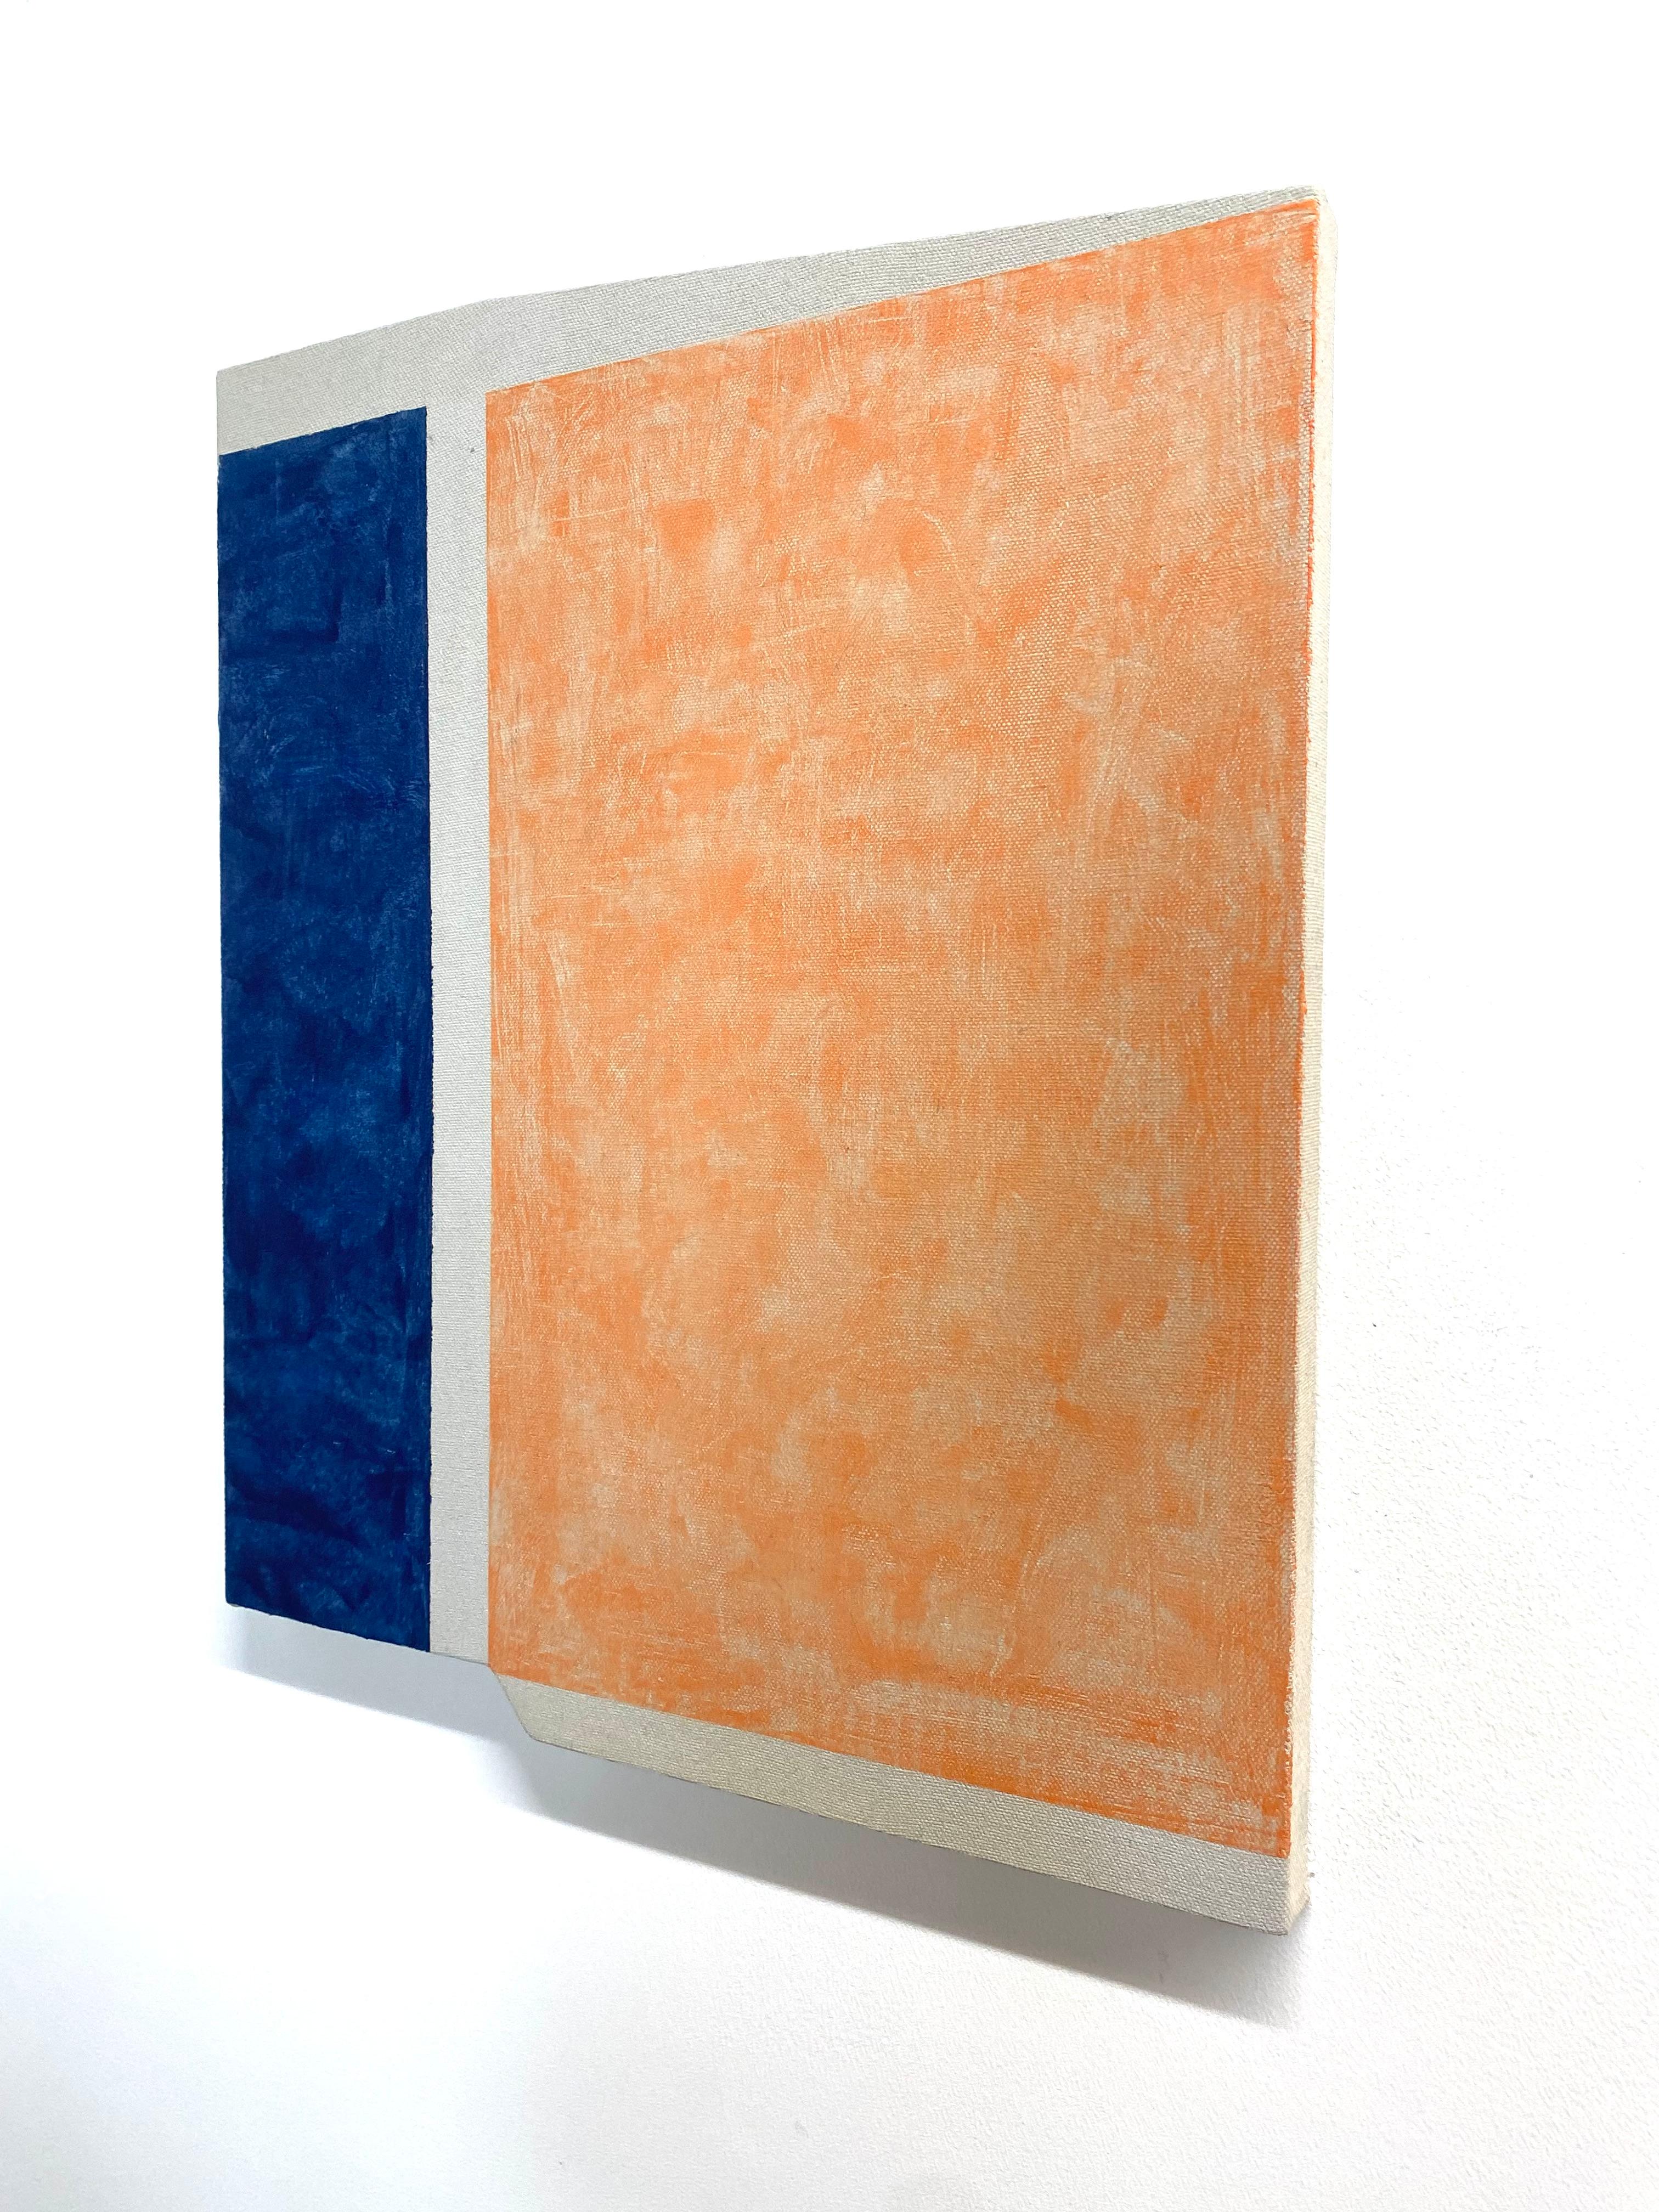 F30, Apricot Orange, Dark Lapis Blue, Geometric Abstract Shaped Panel Painting For Sale 2